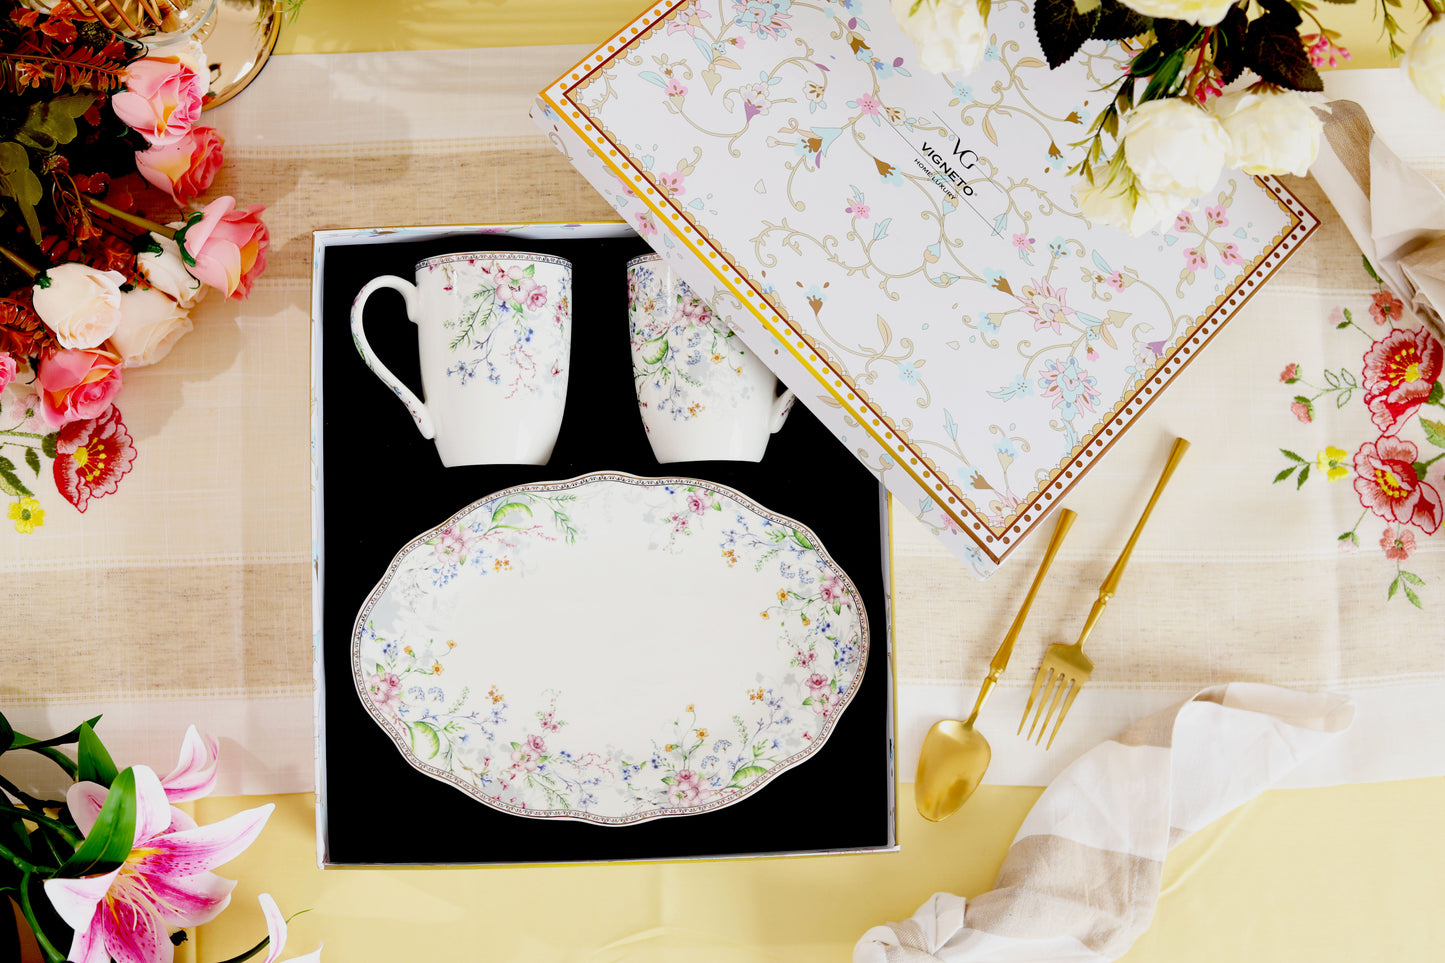 Flower Bed Coffee Mugs and Tray